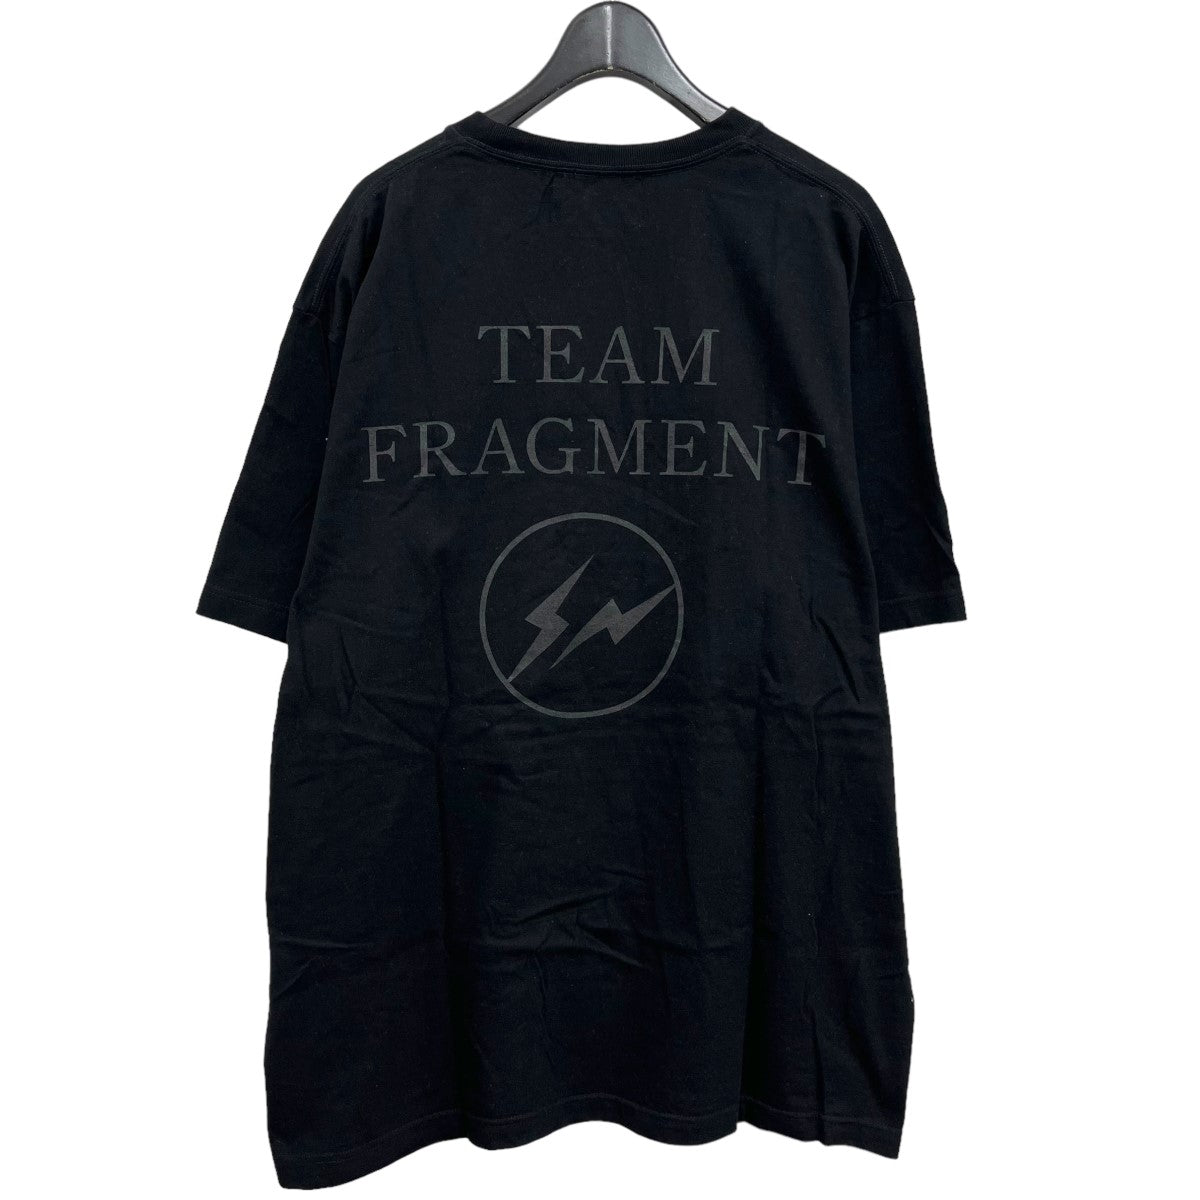 FRAGMENT(フラグメント) FORUM STORE MEMBER 限定 TEAM FRAGMENT S S ...